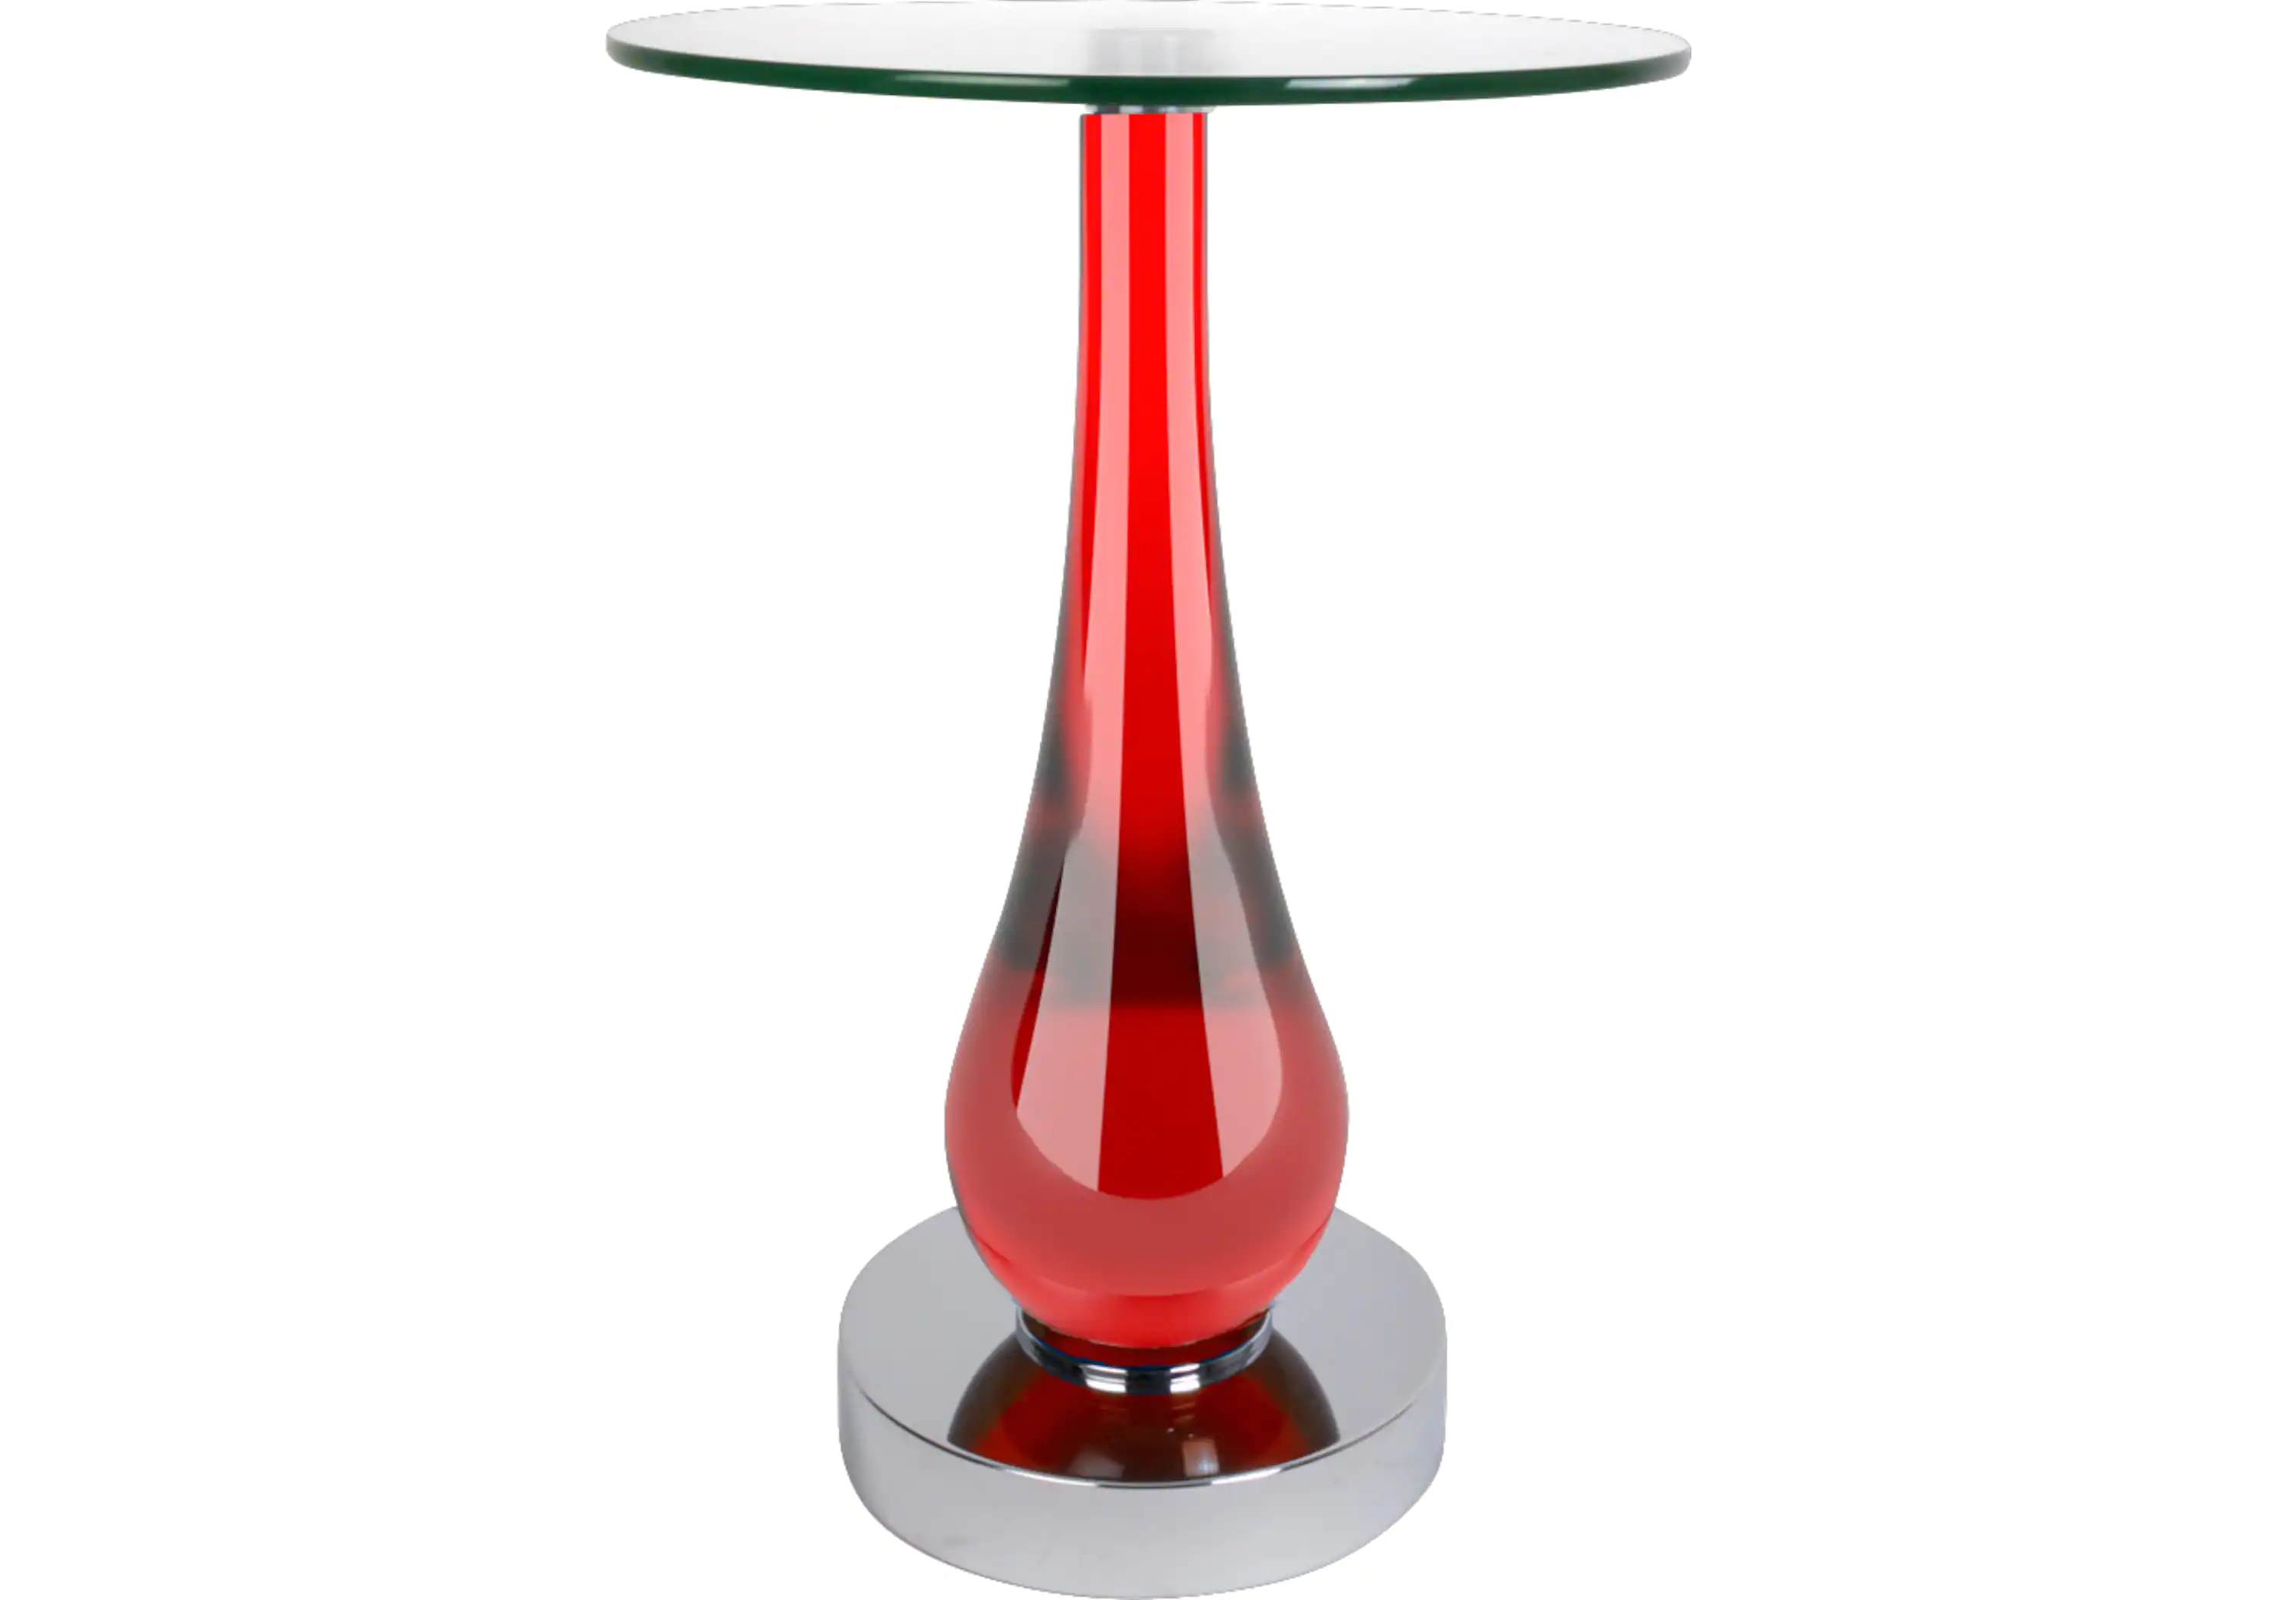 batavia red accent table tables colors product small grey console mini lanterns patio umbrella base modern nic deep cabinet drawer chest half round ikea pottery barn kitchen sets